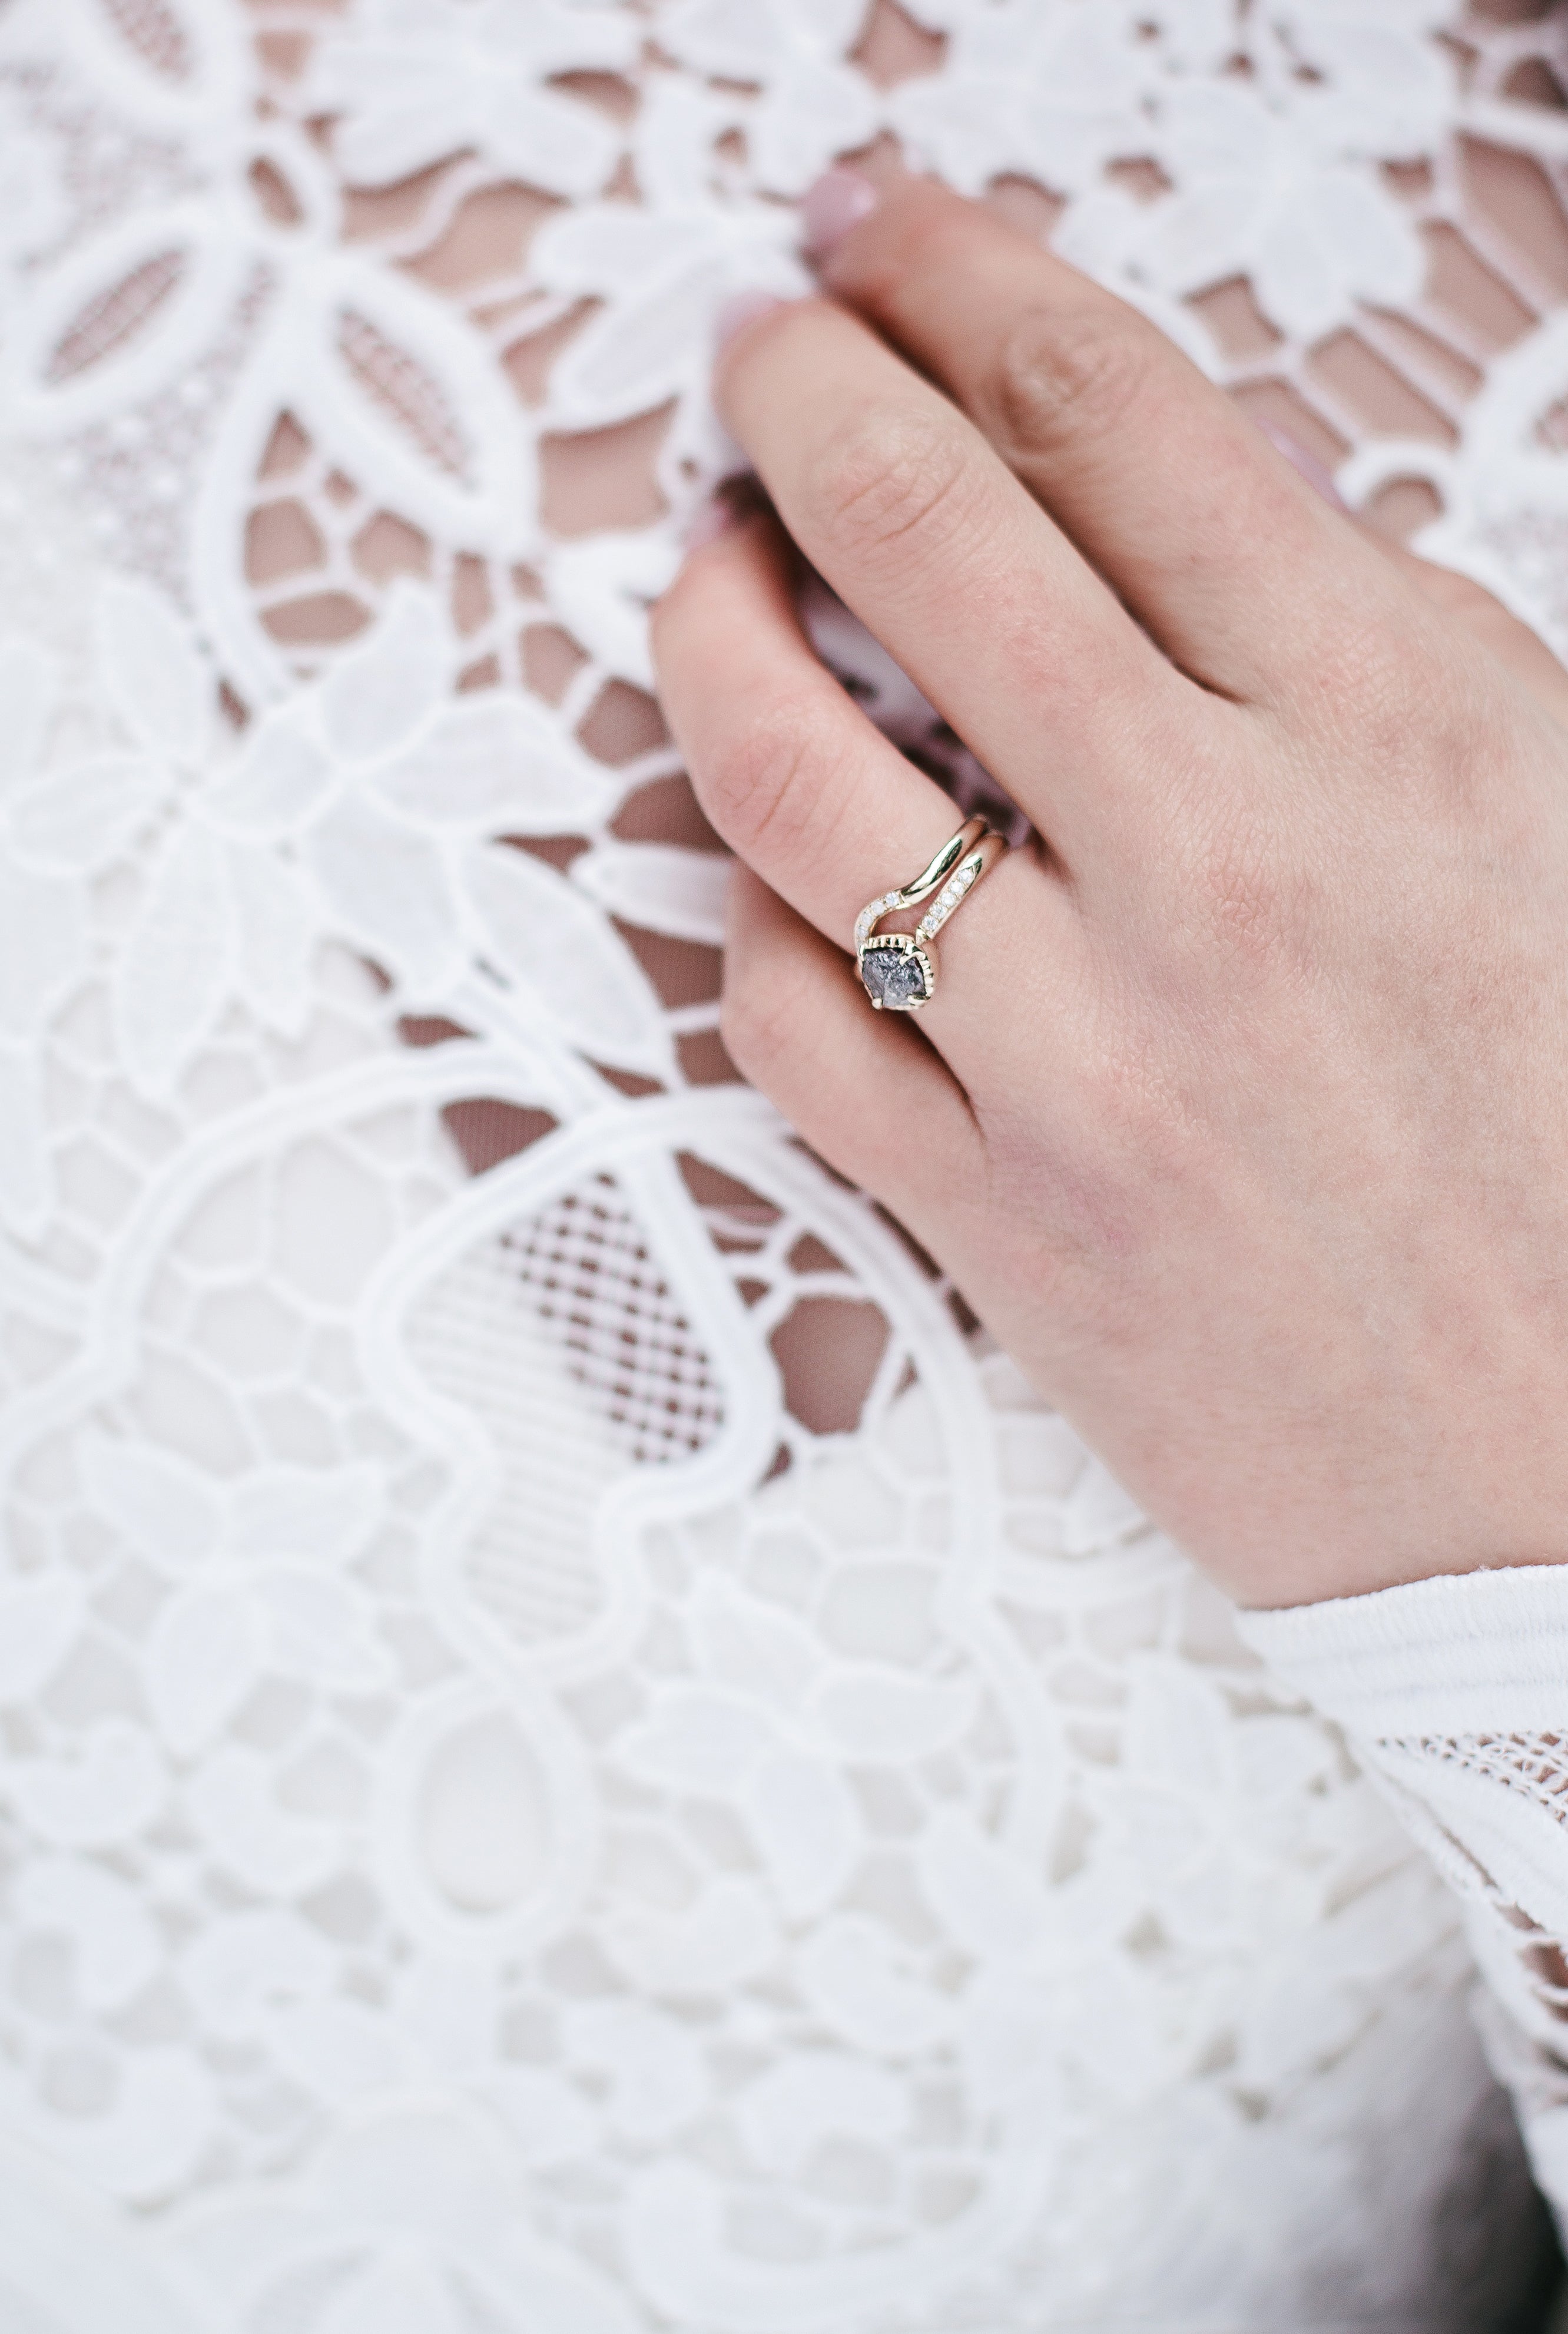 a-close-up-of-the-brides-wedding-ring-and-band.jpg